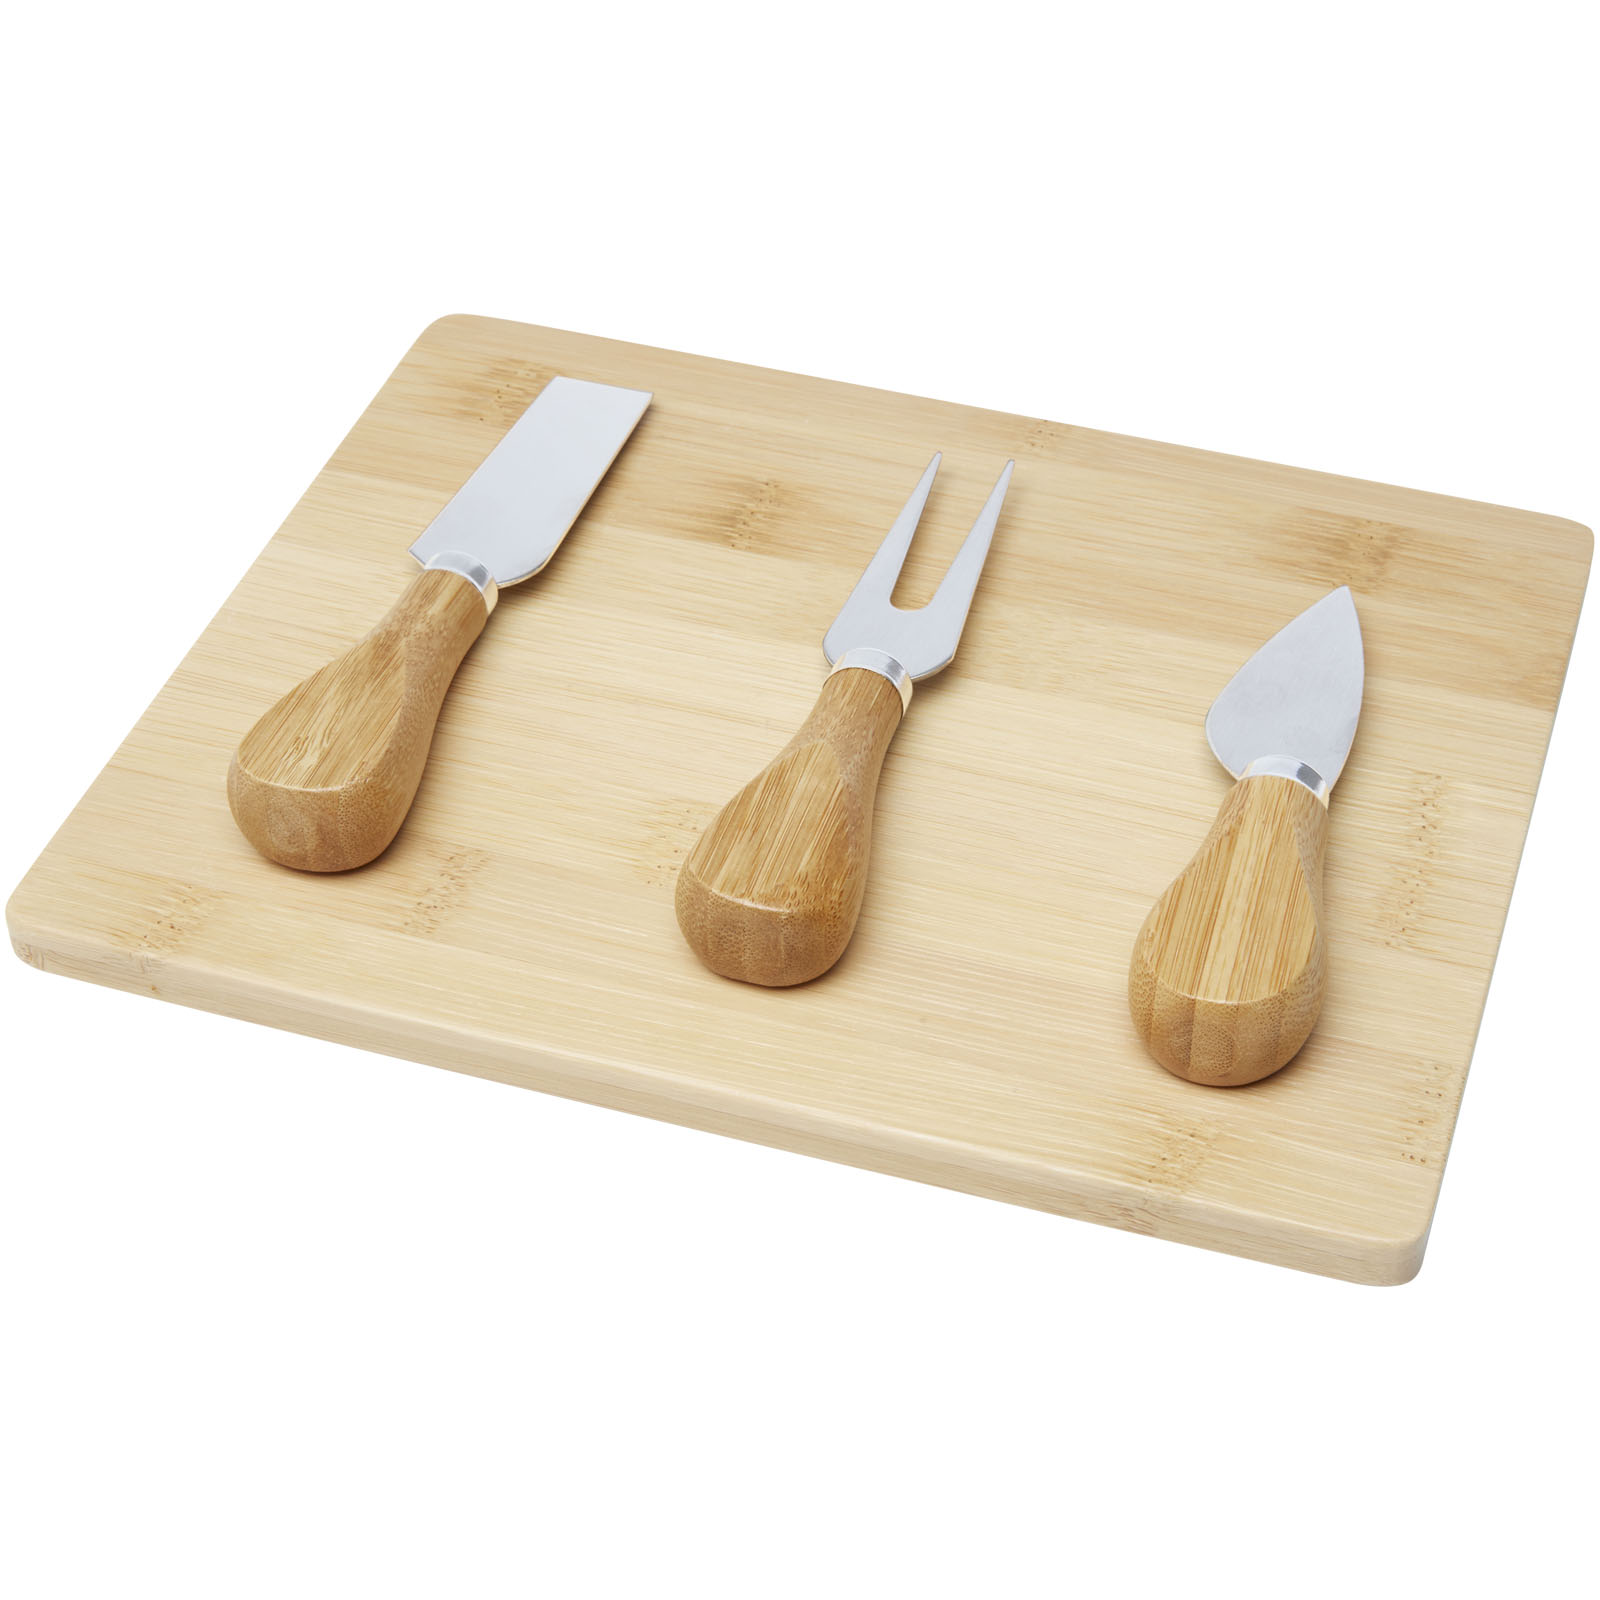 Advertising Serving Sets - Ement bamboo cheese board and tools - 0